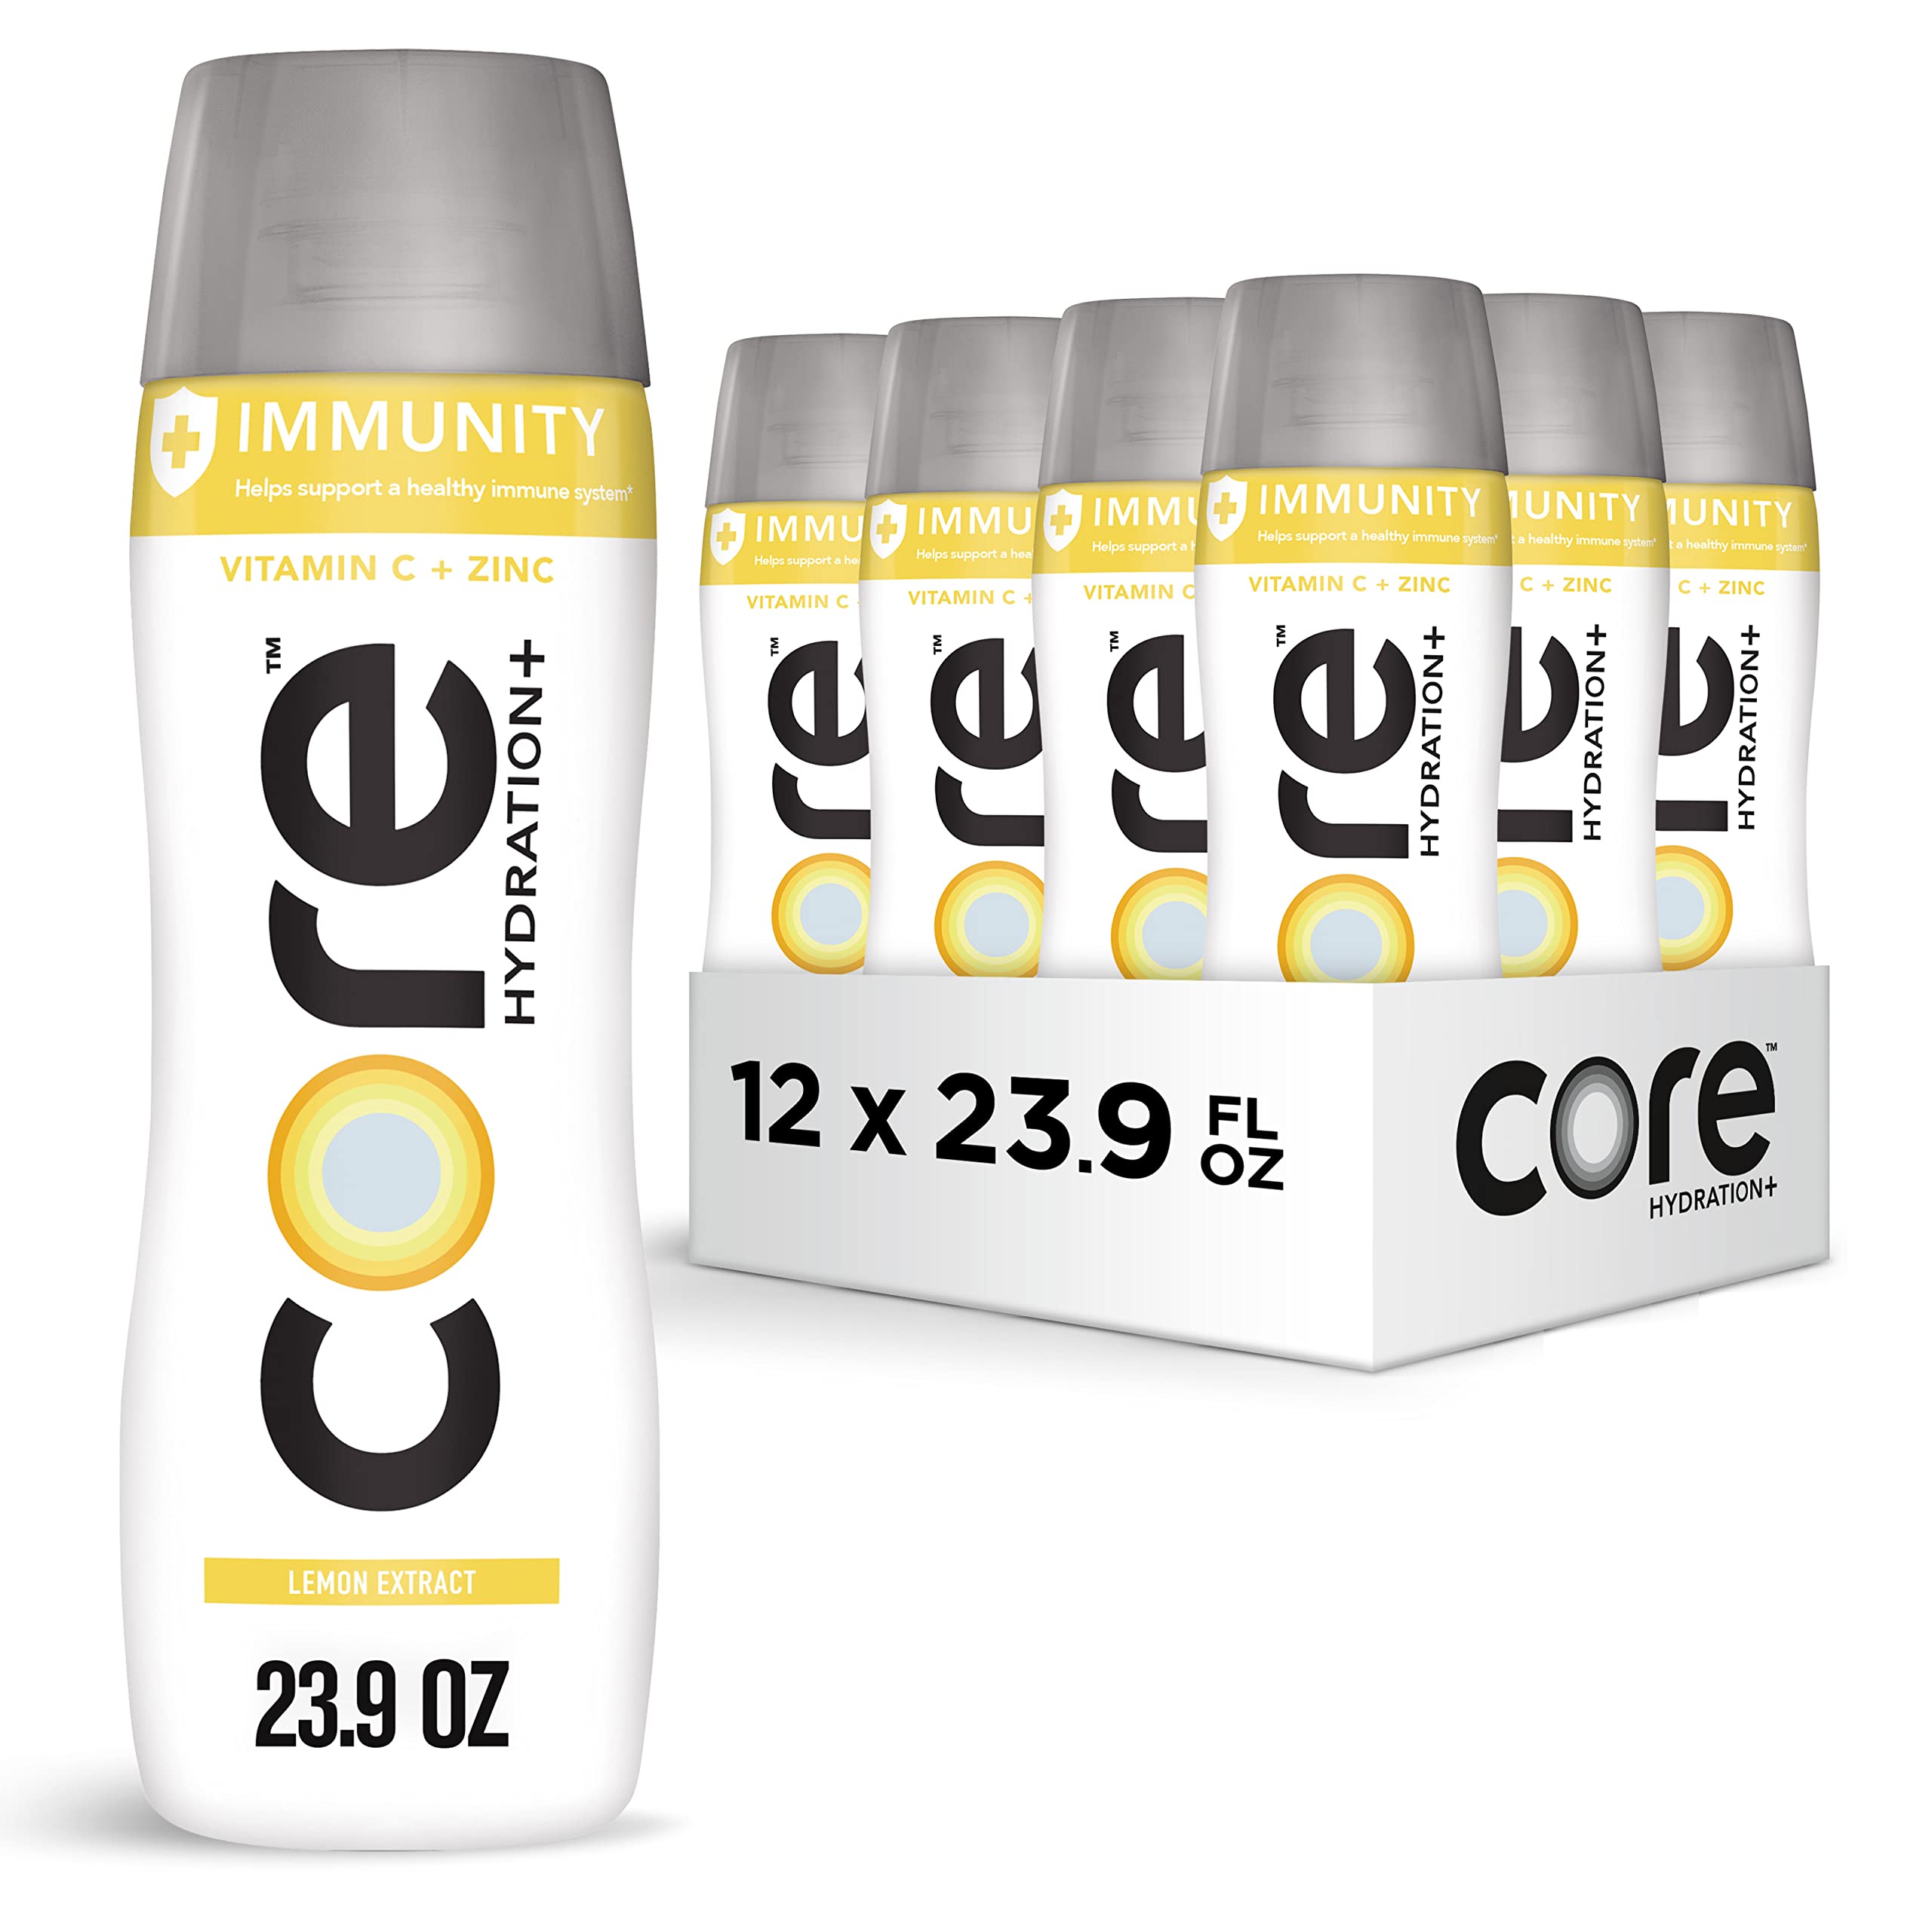 12-Pack 23.9-Oz CORE Hydration+ Immunity Lemon Extract Nutrient Enhanced Water w/ Vitamin C & Zinc $11.40 w/ S&S + Free Shipping w/ Prime or on orders over $35